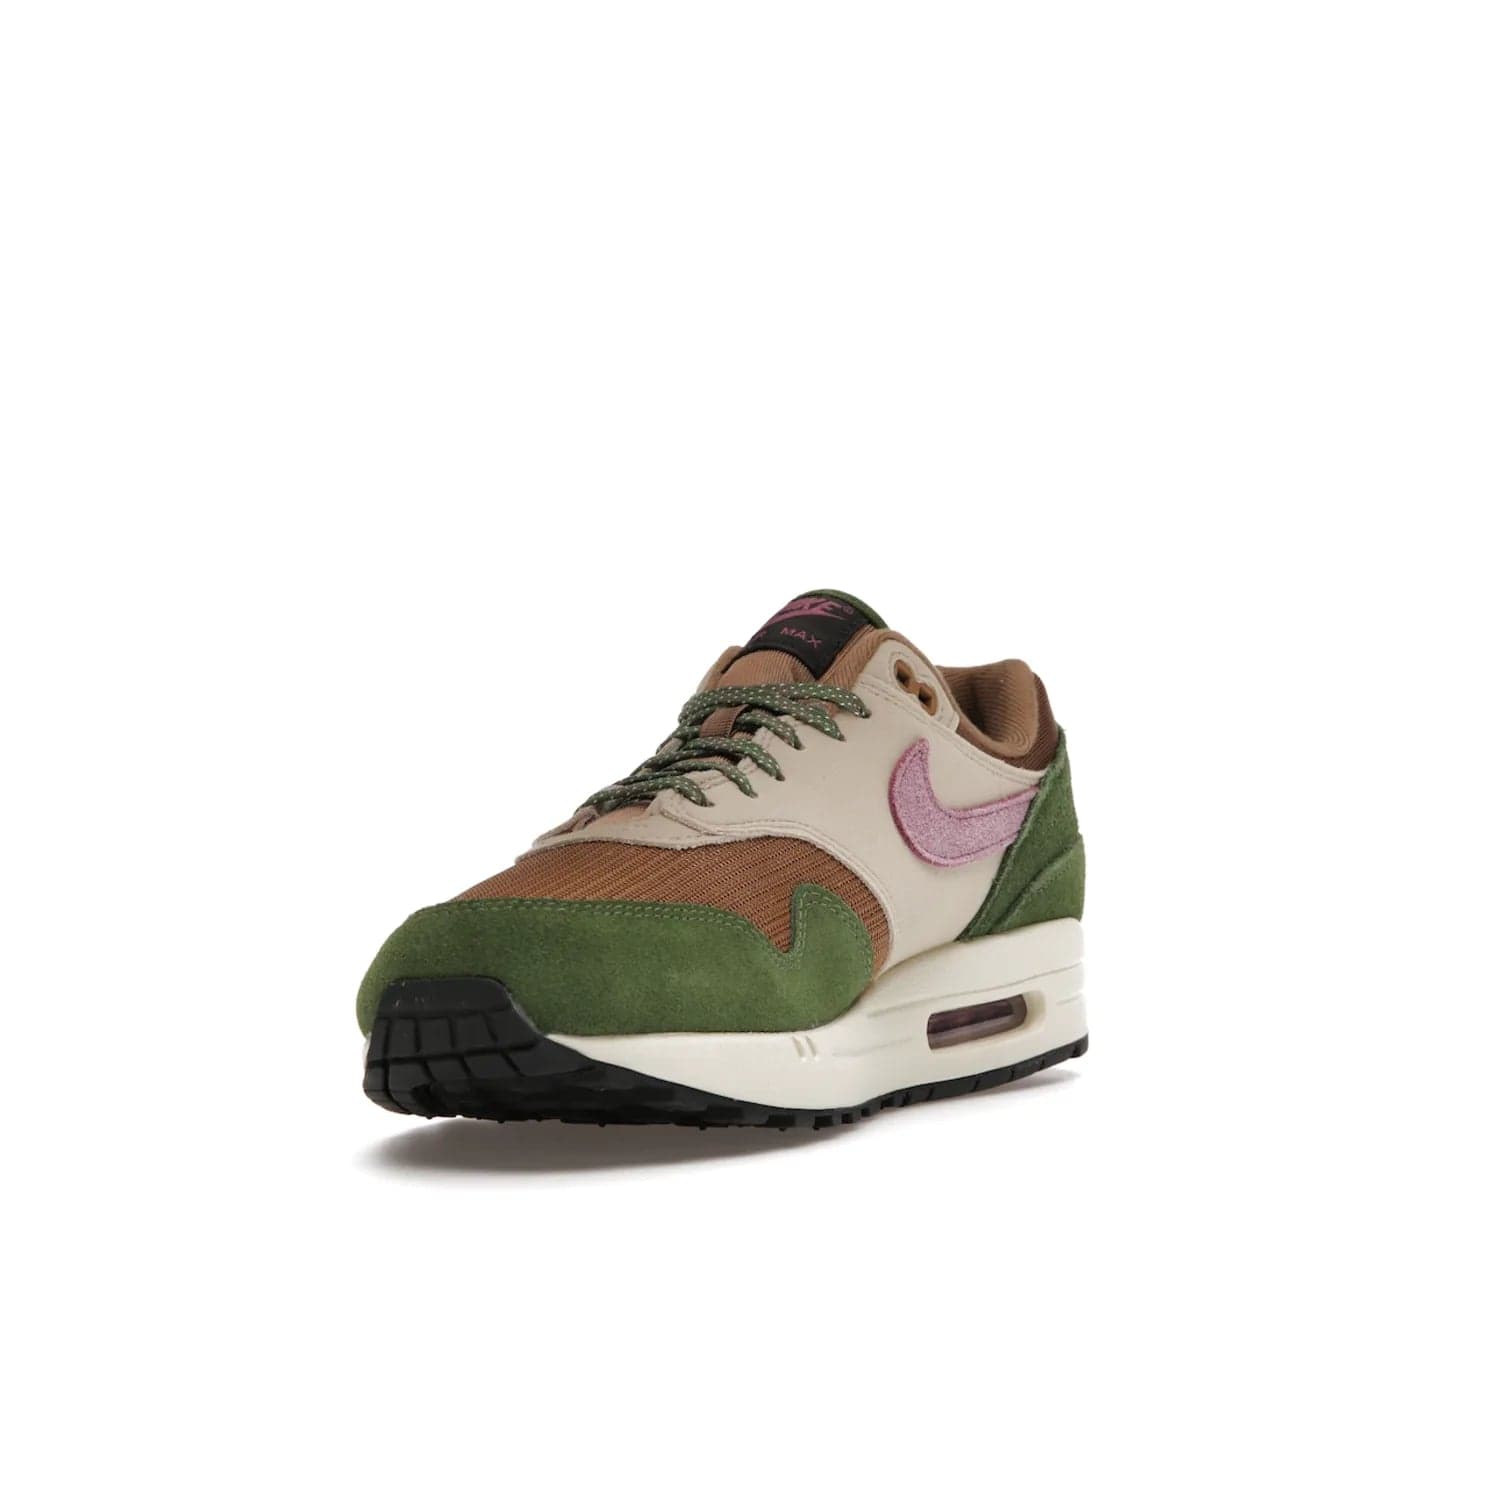 Nike Air Max 1 SH Treeline - Image 13 - Only at www.BallersClubKickz.com - A classic Nike Air Max 1 SH Treeline with a brown mesh upper, taupe Durabuck overlays, and hairy green suede details. Light Bordeaux Swoosh and woven tongue label for a pop of color. Released in May 2022. Perfect for any outfit and sure to impress.